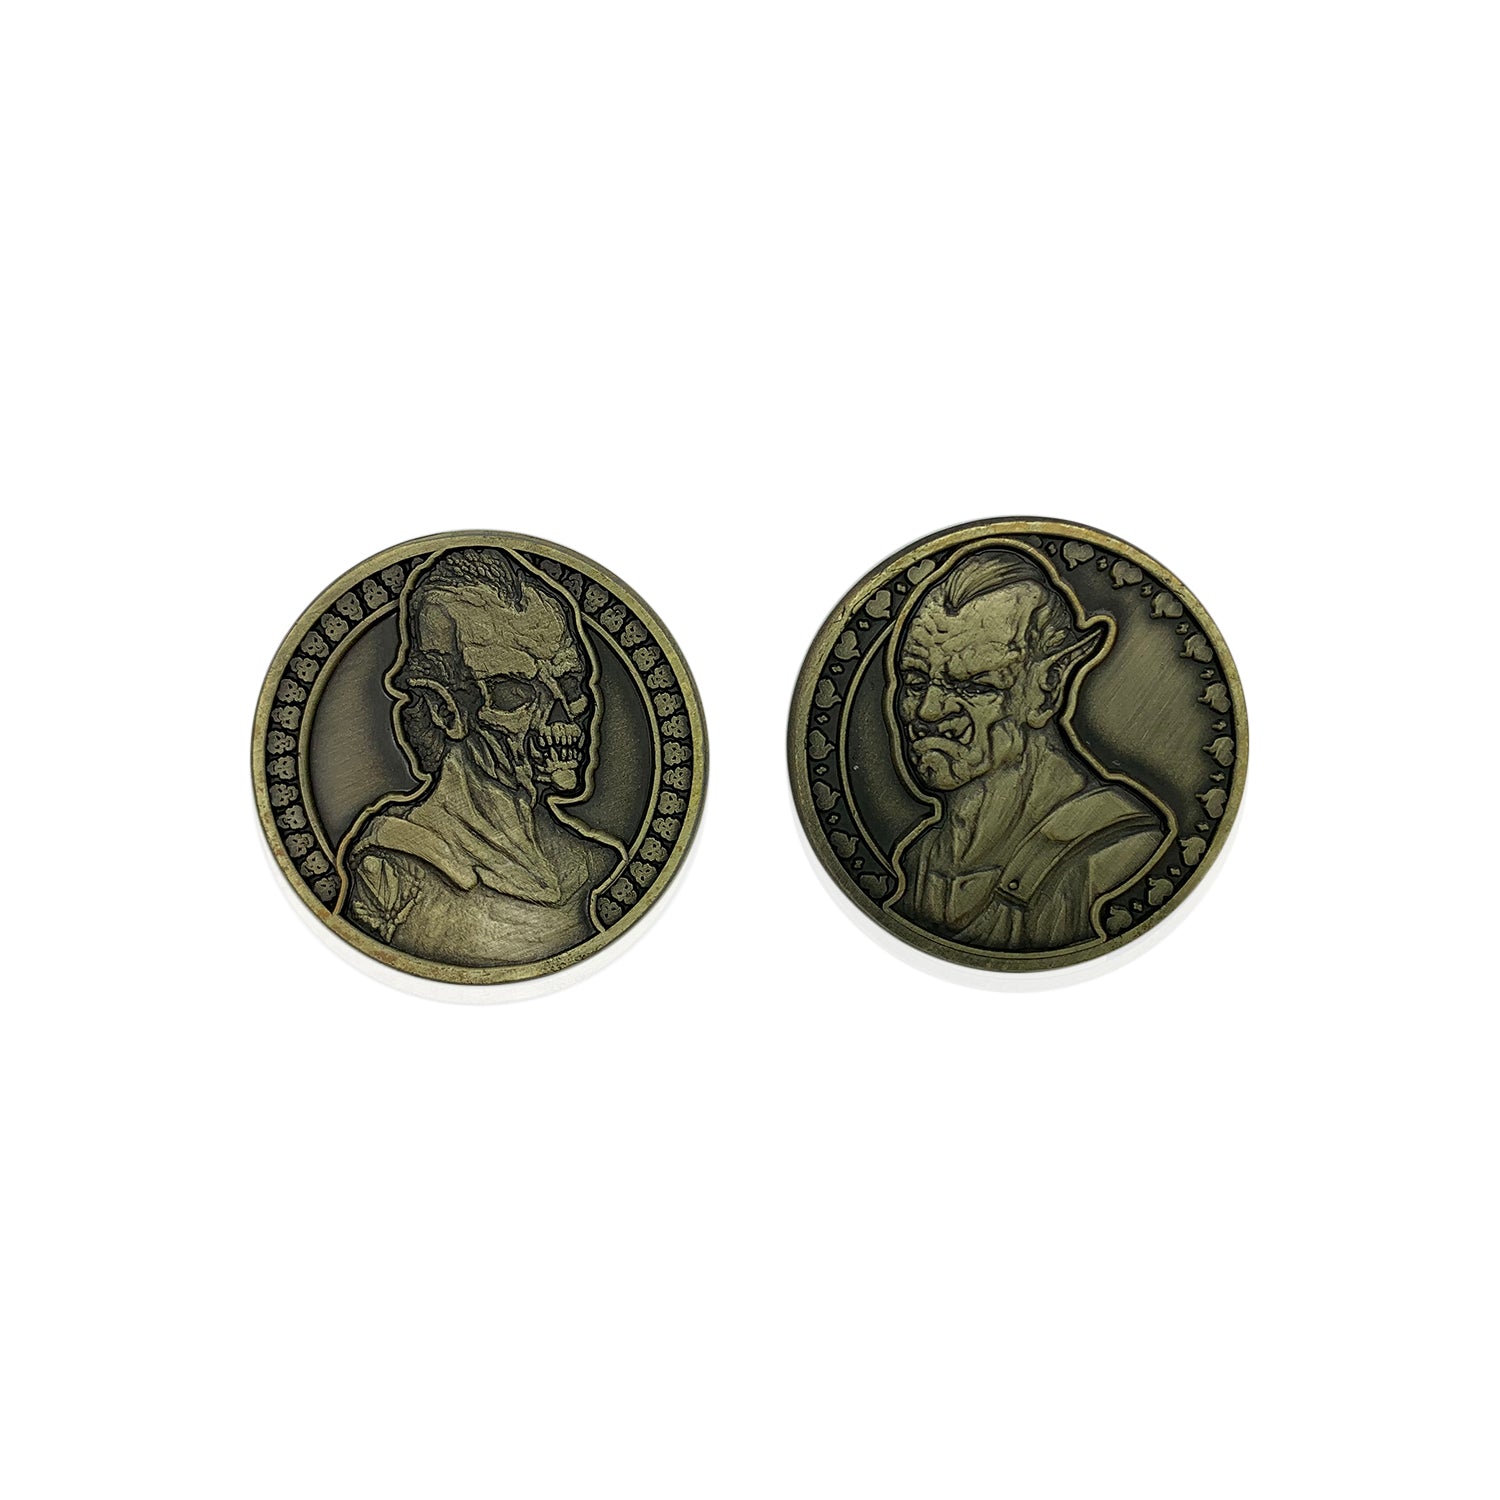 Adventure Coins - Life or Death Coins Set of 10